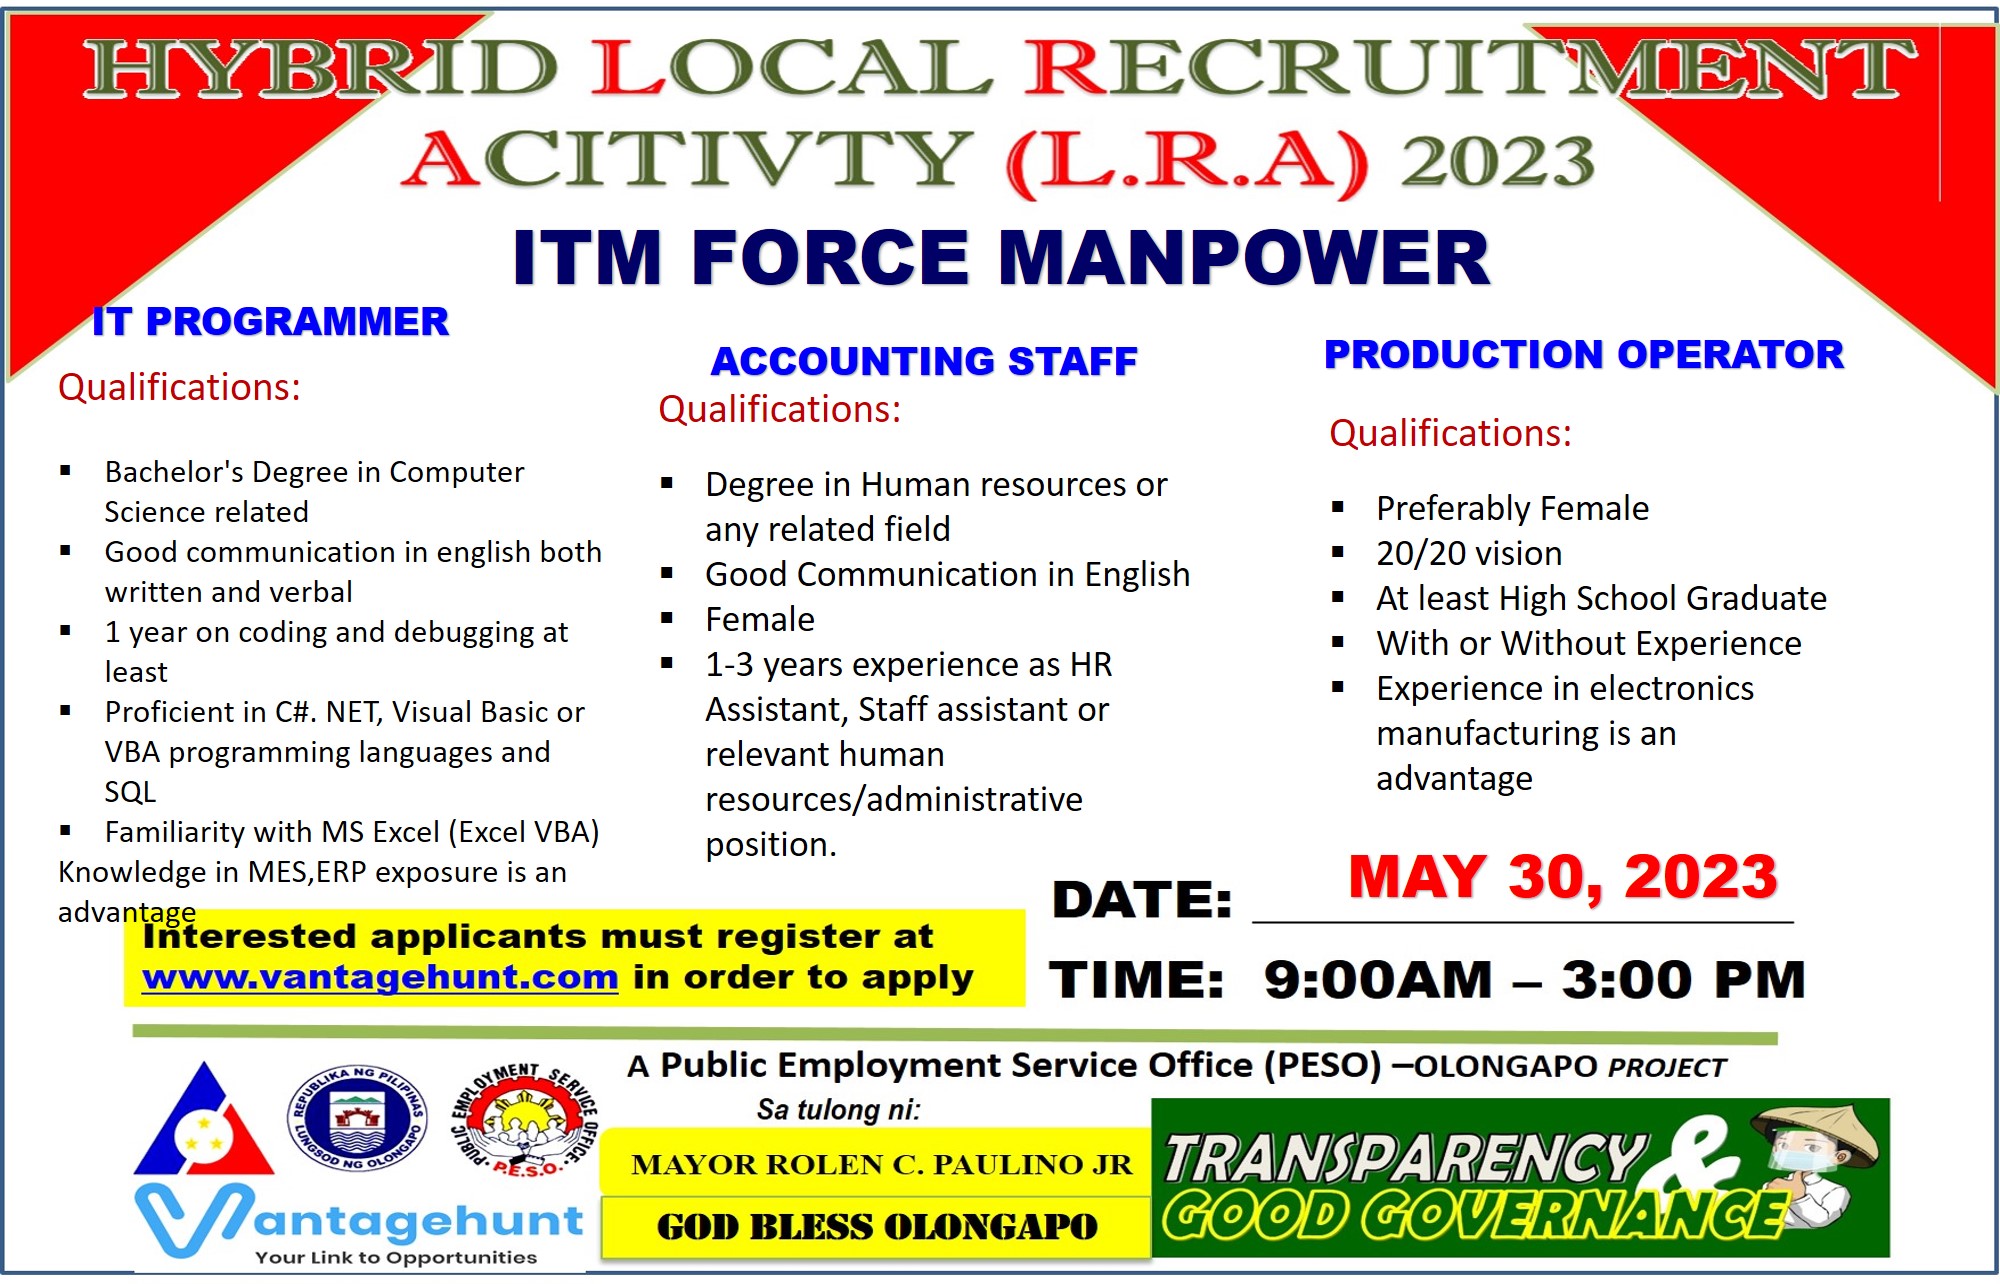 ITM-FORCE MANPOWER - Face to Face Interview Banner Vantagehunt